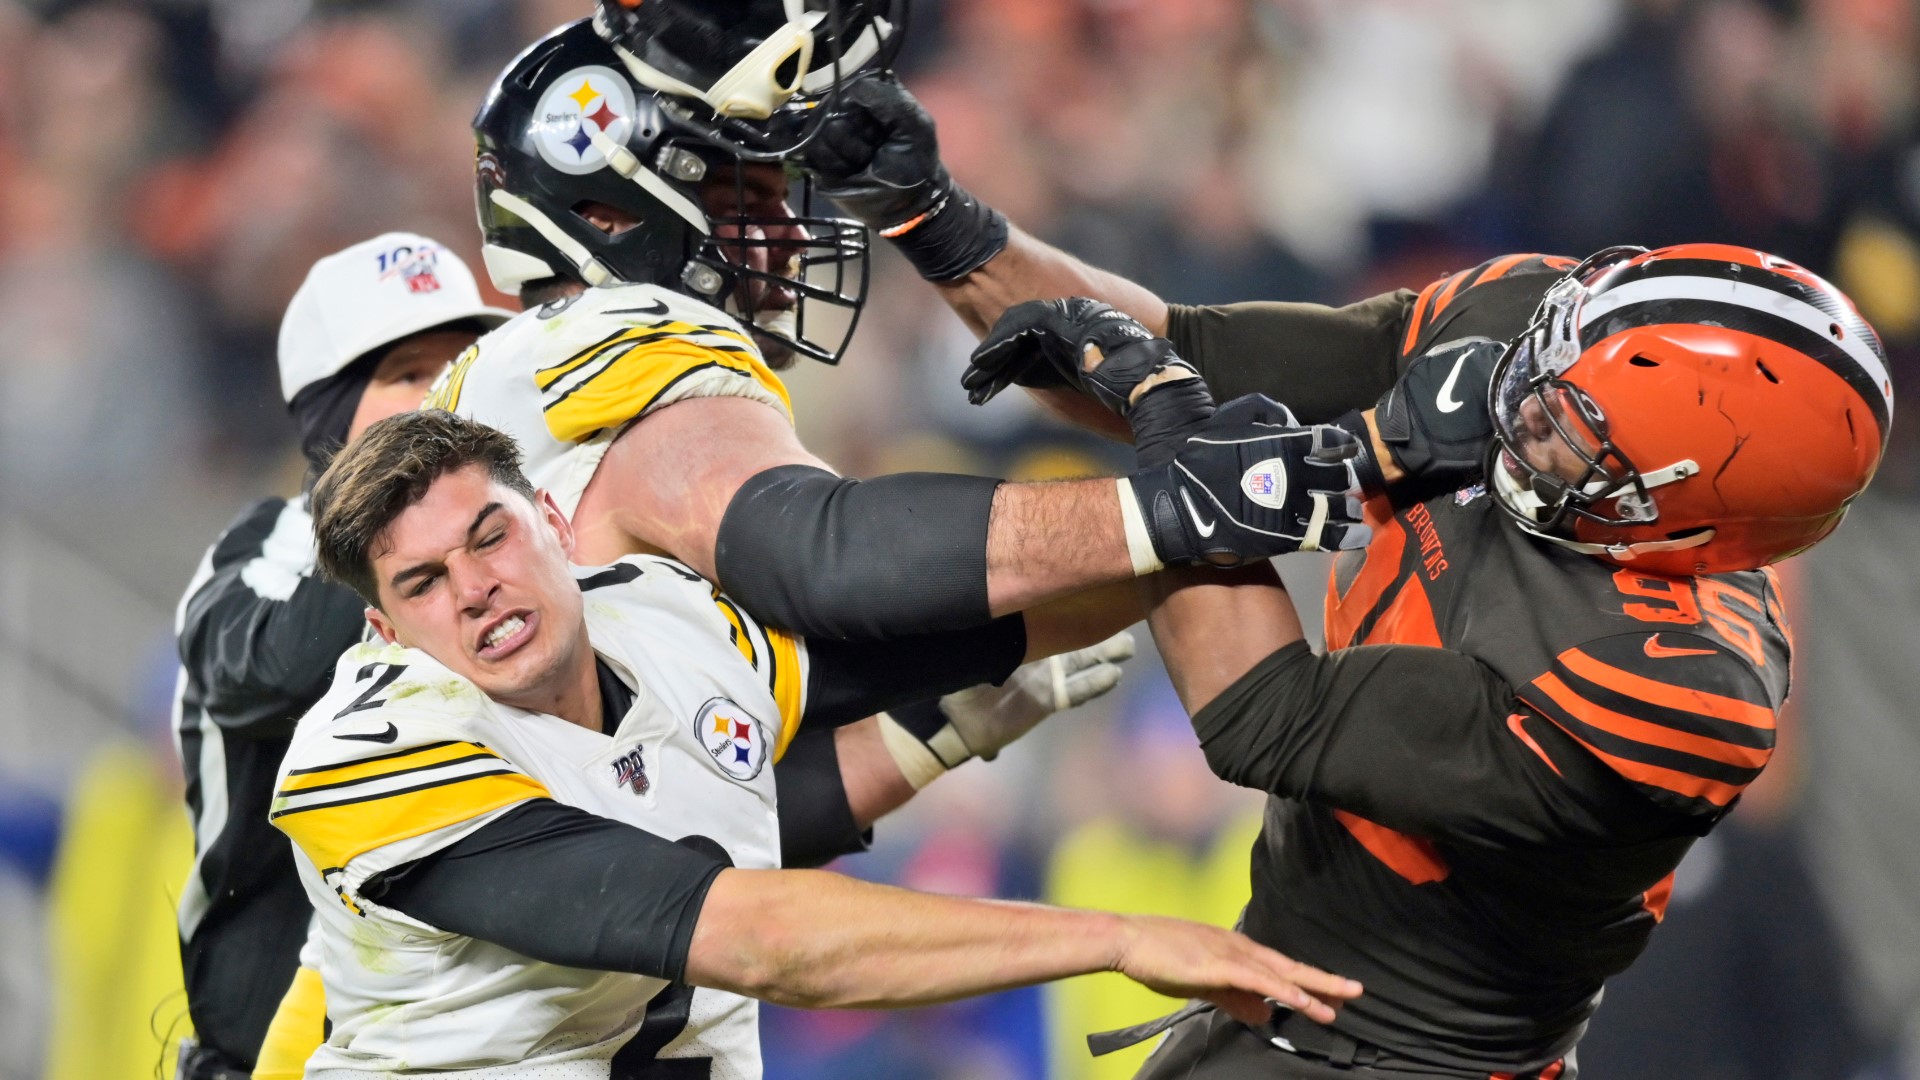 Cleveland Browns defensive end is scheduled to meet with an NFL representative to appeal his suspension after a fight during last week's game vs the Pittsburgh Steel